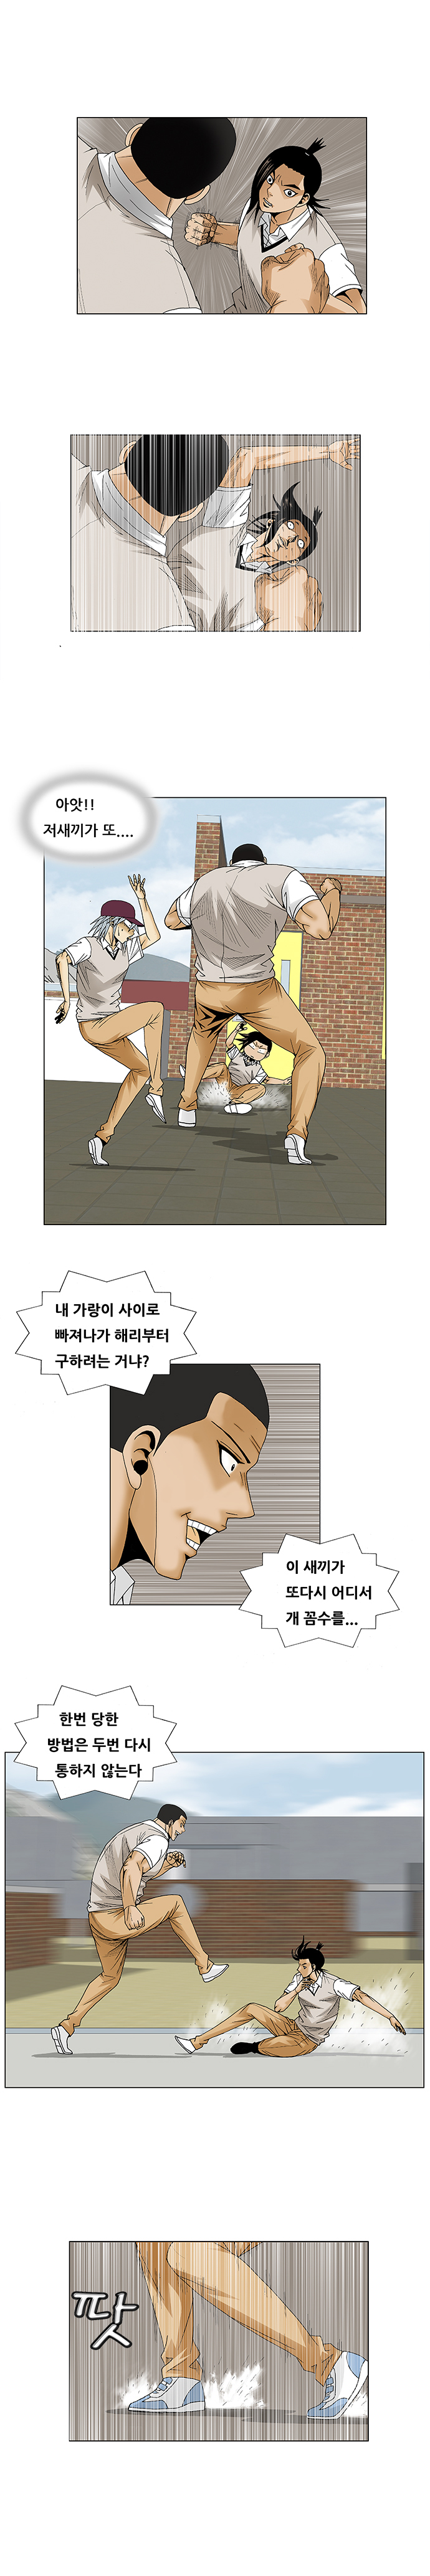 Ultimate Legend - Kang Hae Hyo - Chapter 81 - Page 7